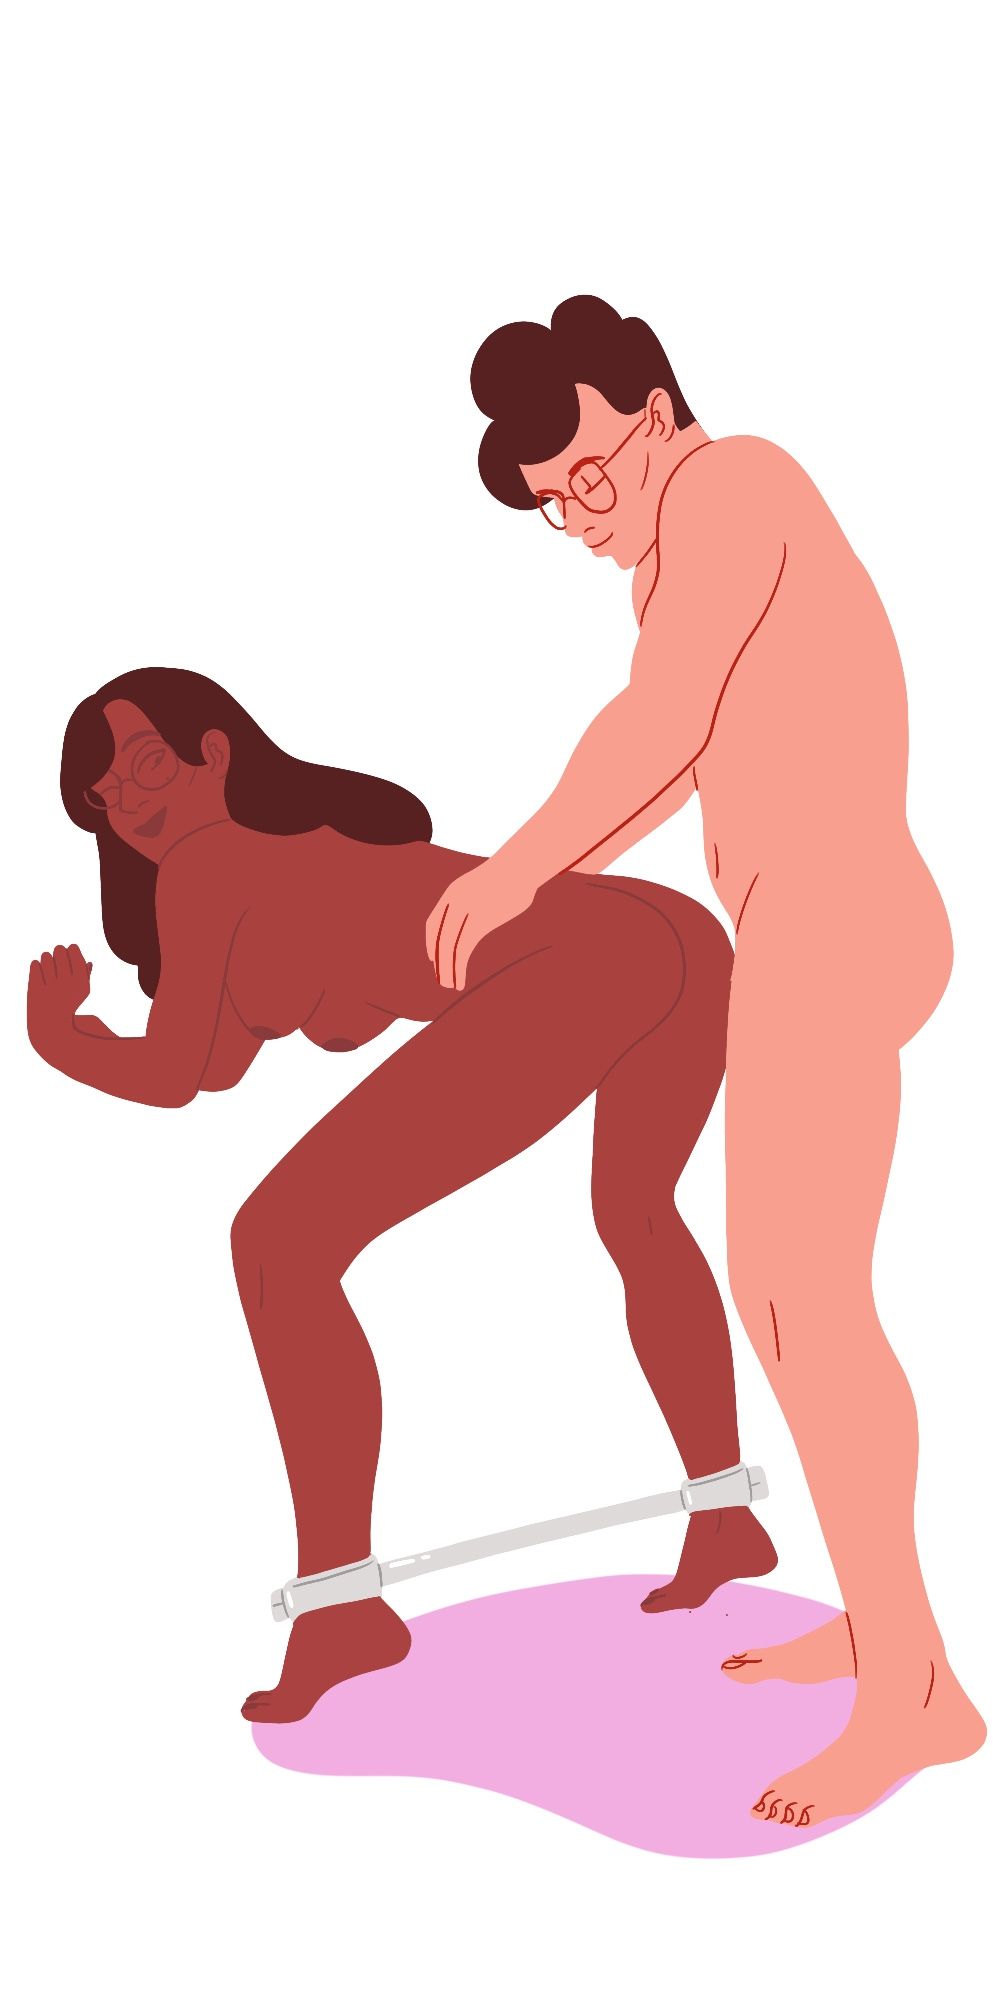 8 Submissive Sex Positions